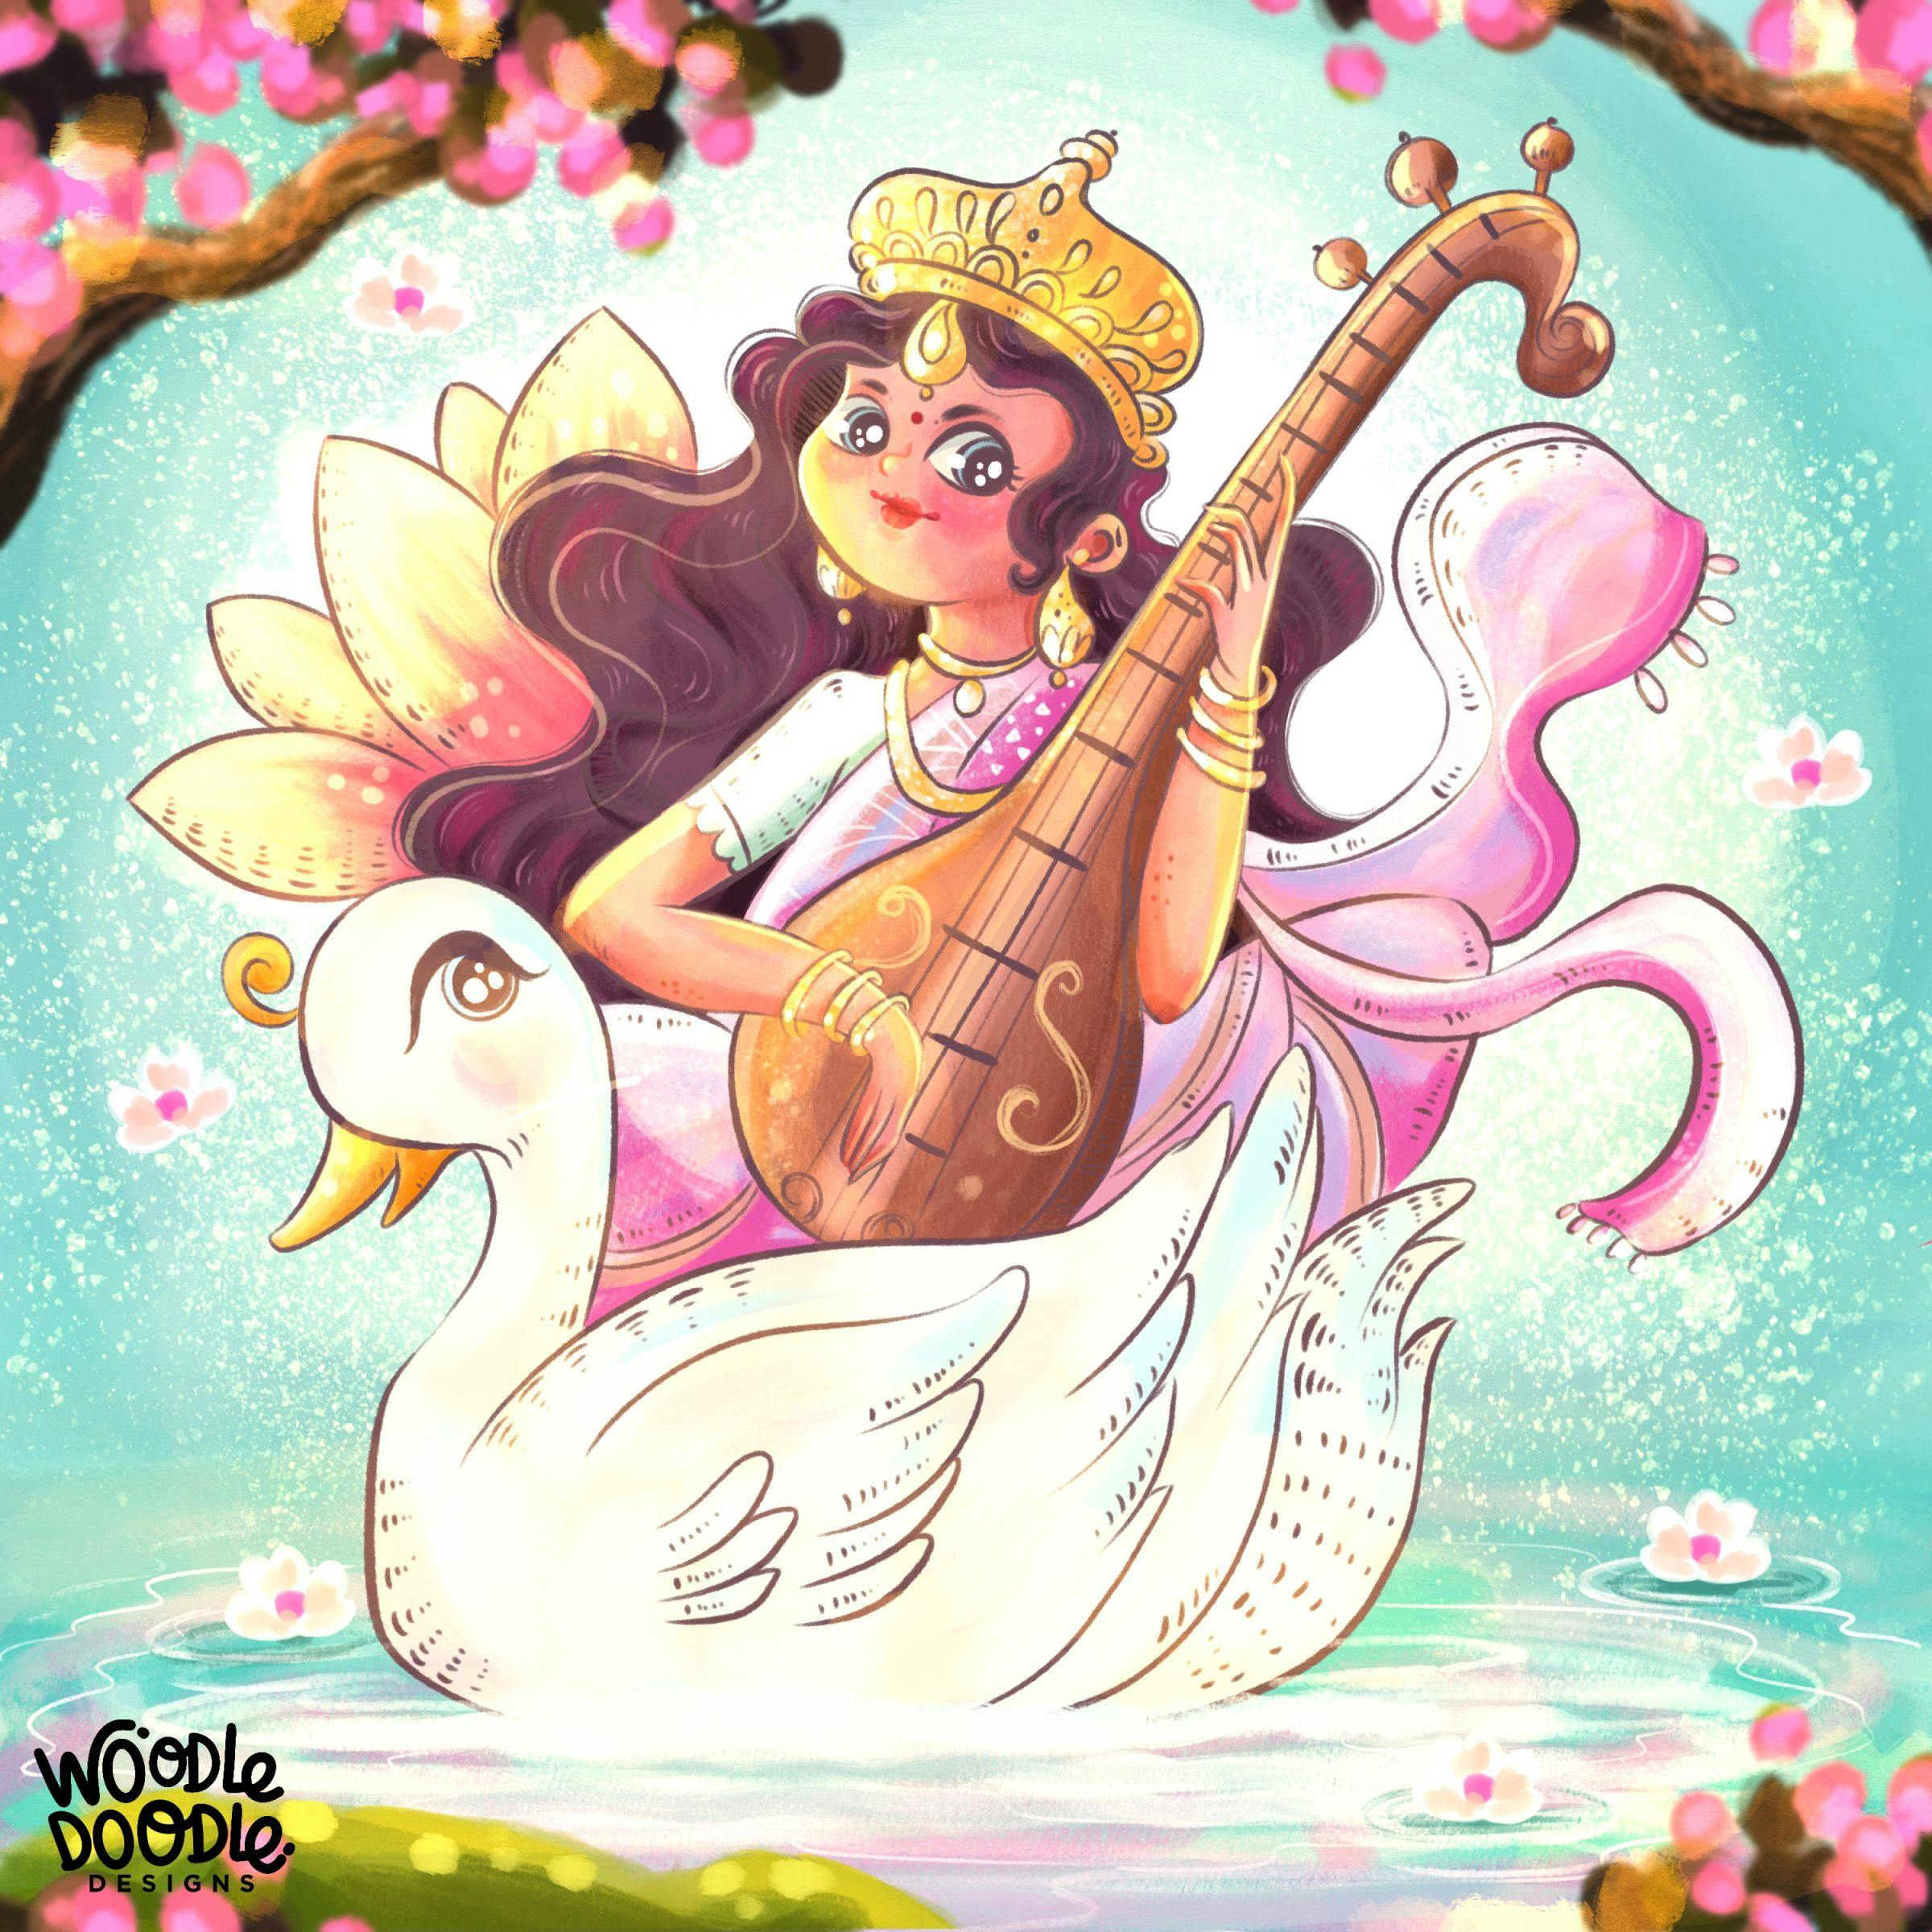 A woman playing sitar on a swan